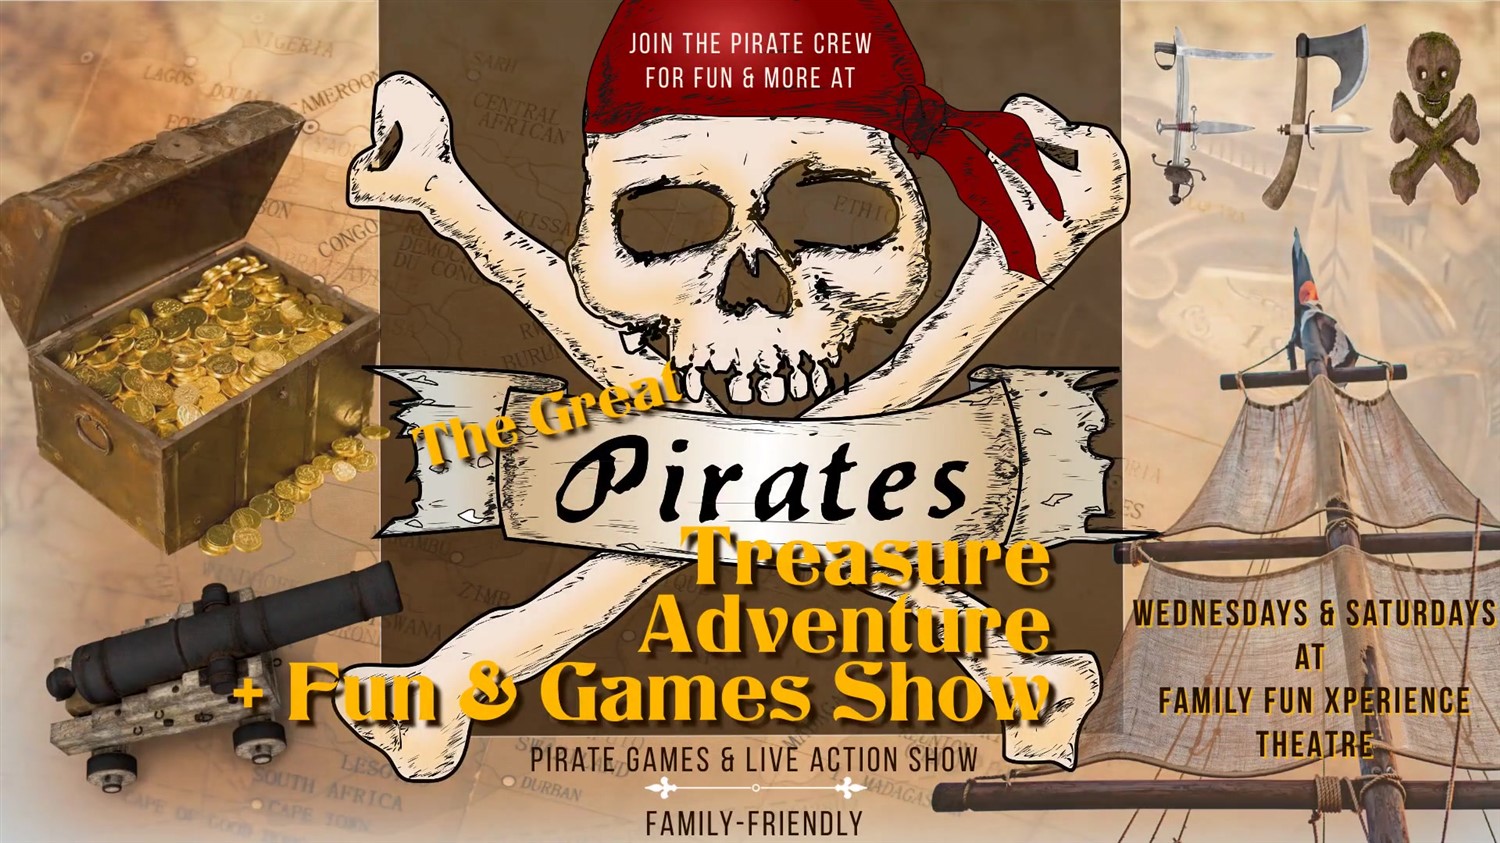 PIRATE ADVENTURE FUN & GAMES SHOW 5-Star Xperience with the Foggy FoX Pirates! on ago. 24, 19:00@FFX Theatre - Pick a seat, Buy tickets and Get information on Family Fun Xperience tickets.ffxshow.org